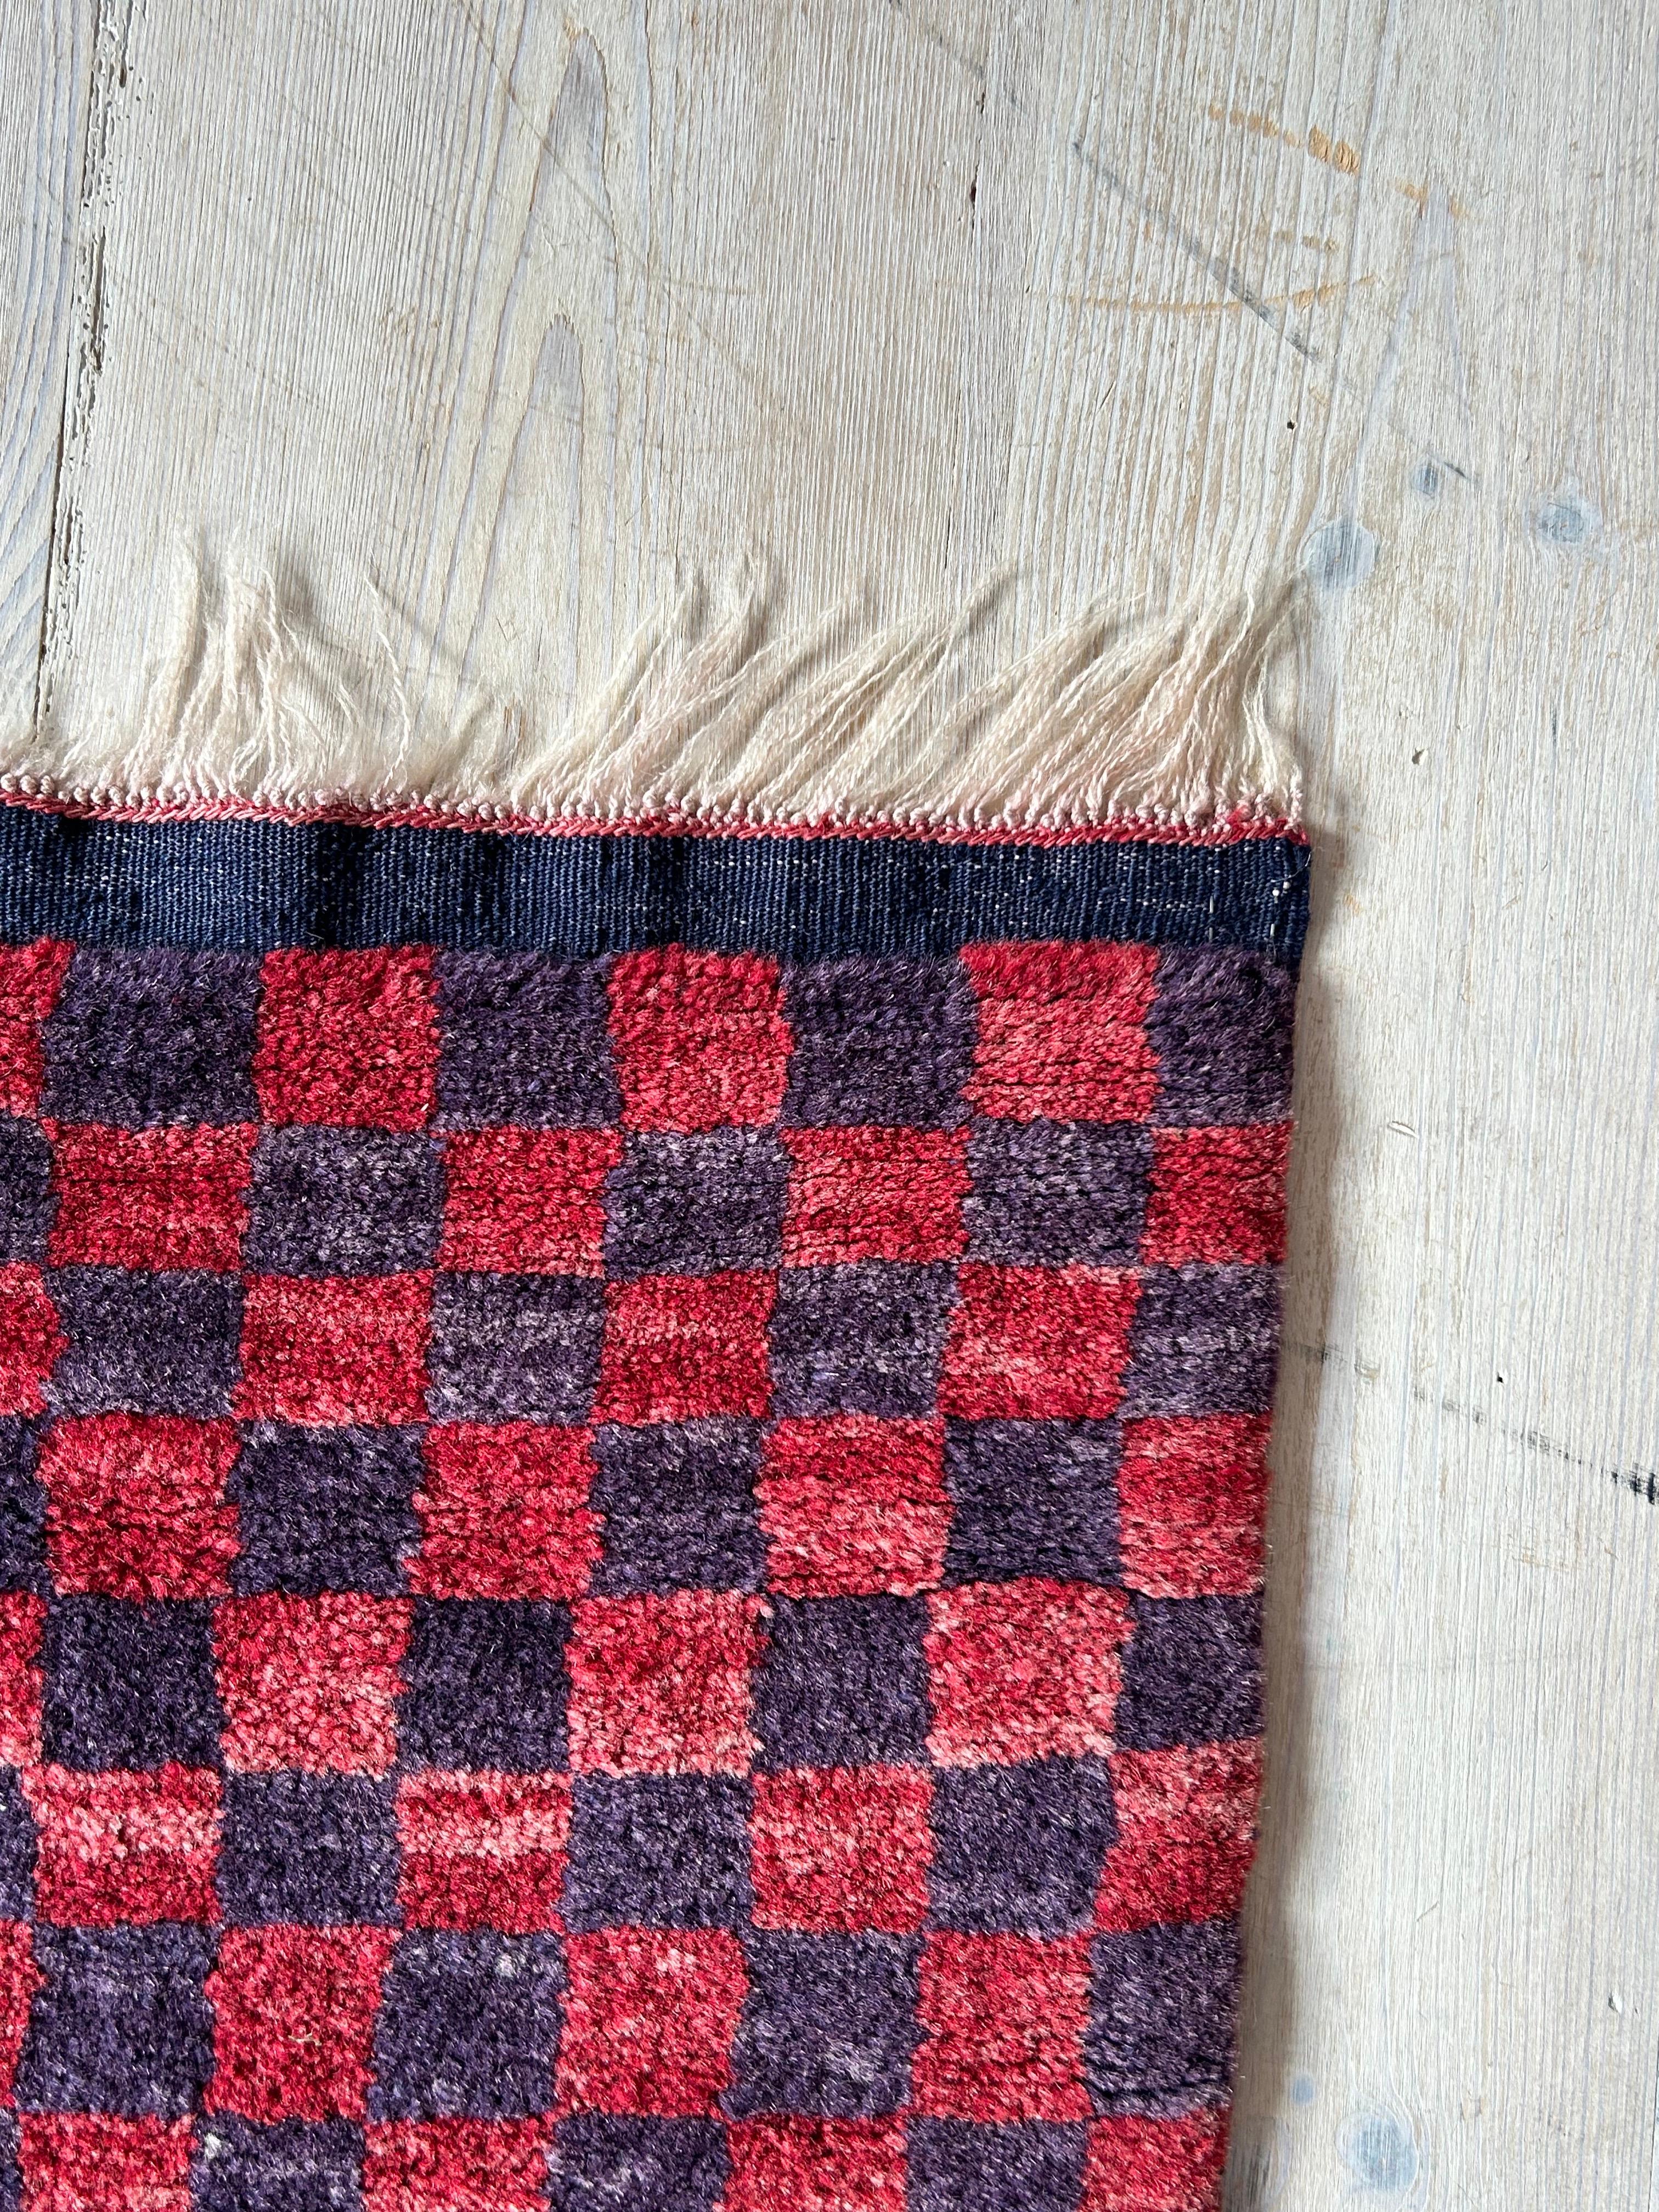 Vintage Tulu Rug with Red and Purple Check Pattern, Turkey, 20th Century For Sale 3